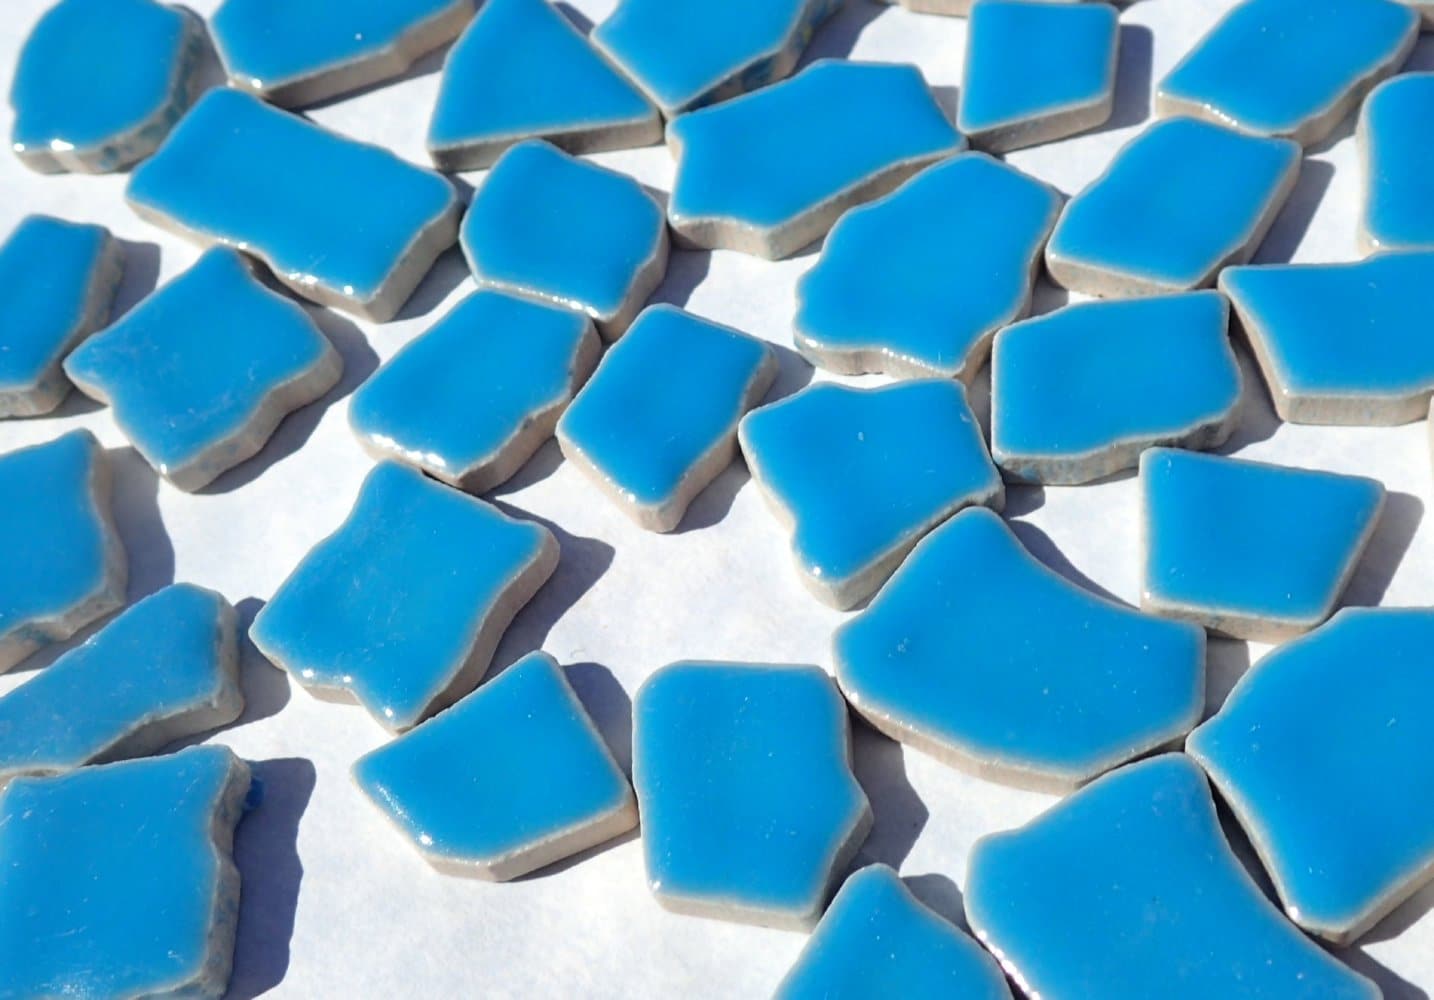 Mediterranean Blue Mosaic Ceramic Tiles - Jigsaw Puzzle Shaped Pieces - Half Pound - Assorted Sizes Random Shapes in Thalo Blue